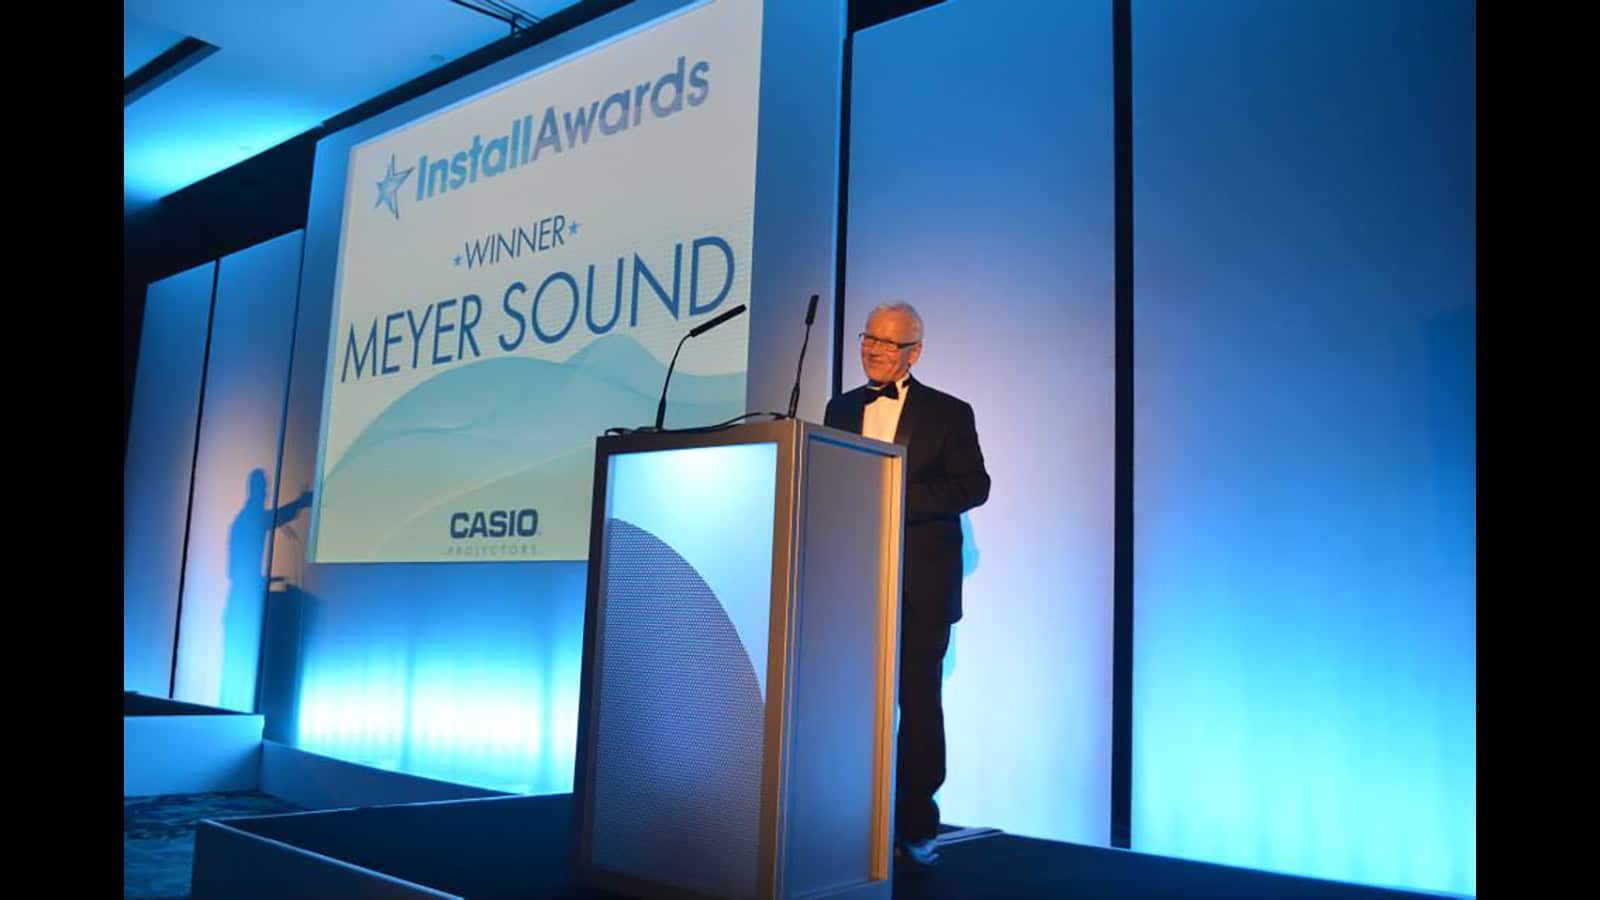 John Pellowe, Constellation project director for Meyer Sound, accepts the Teamwork Award for the Exploratorium